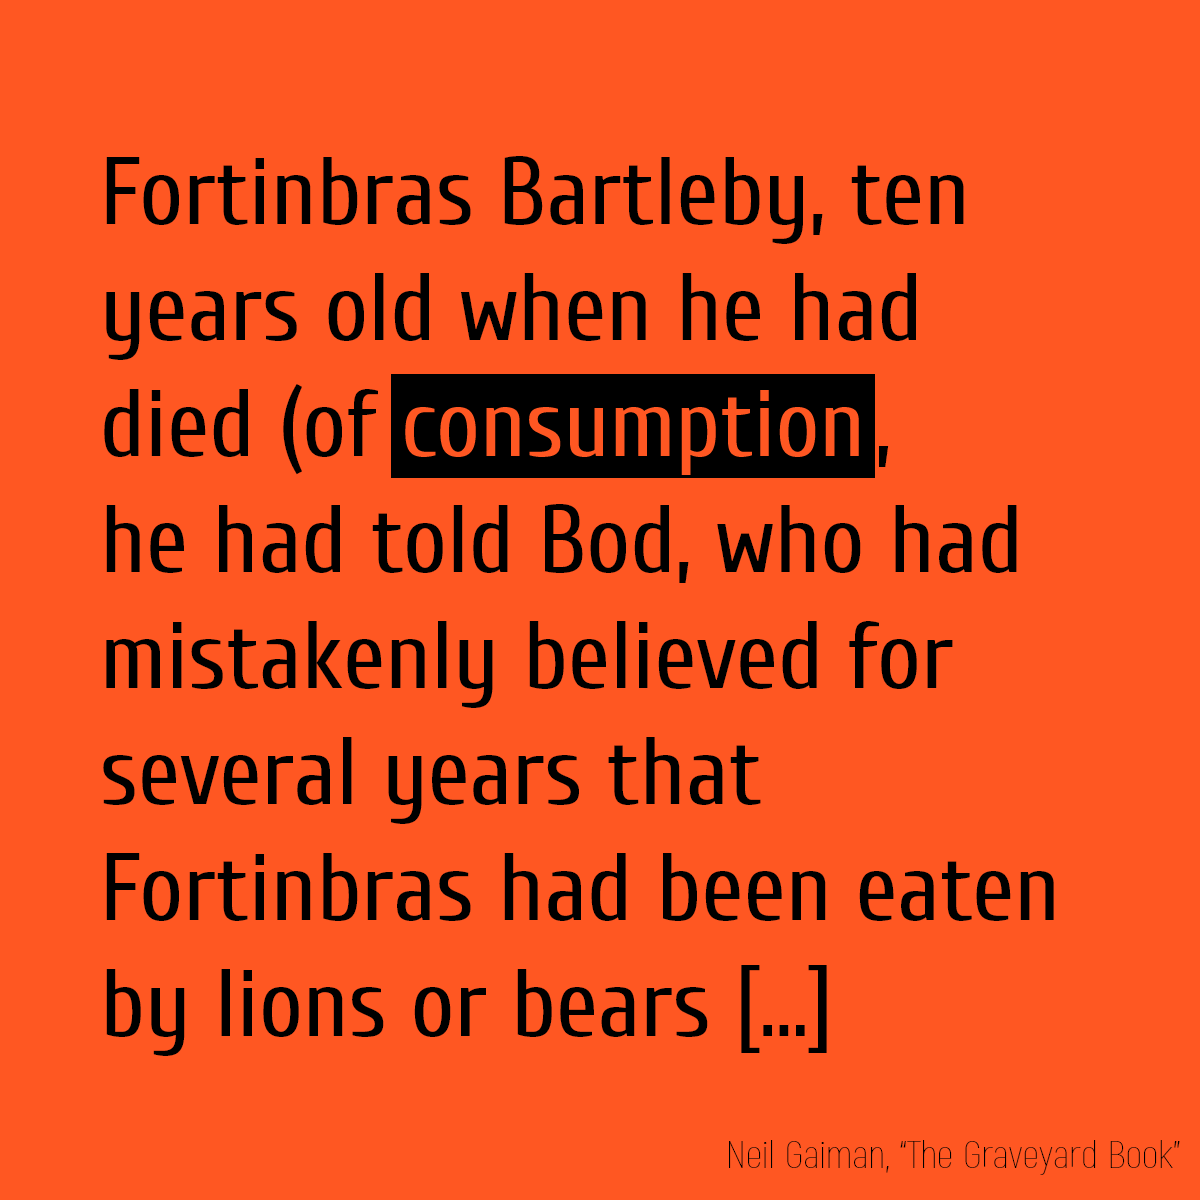 Fortinbras Bartleby, ten years old when he had died (of **consumption**, he had told Bod, who had mistakenly believed for several years that Fortinbras had been eaten by lions or bears,